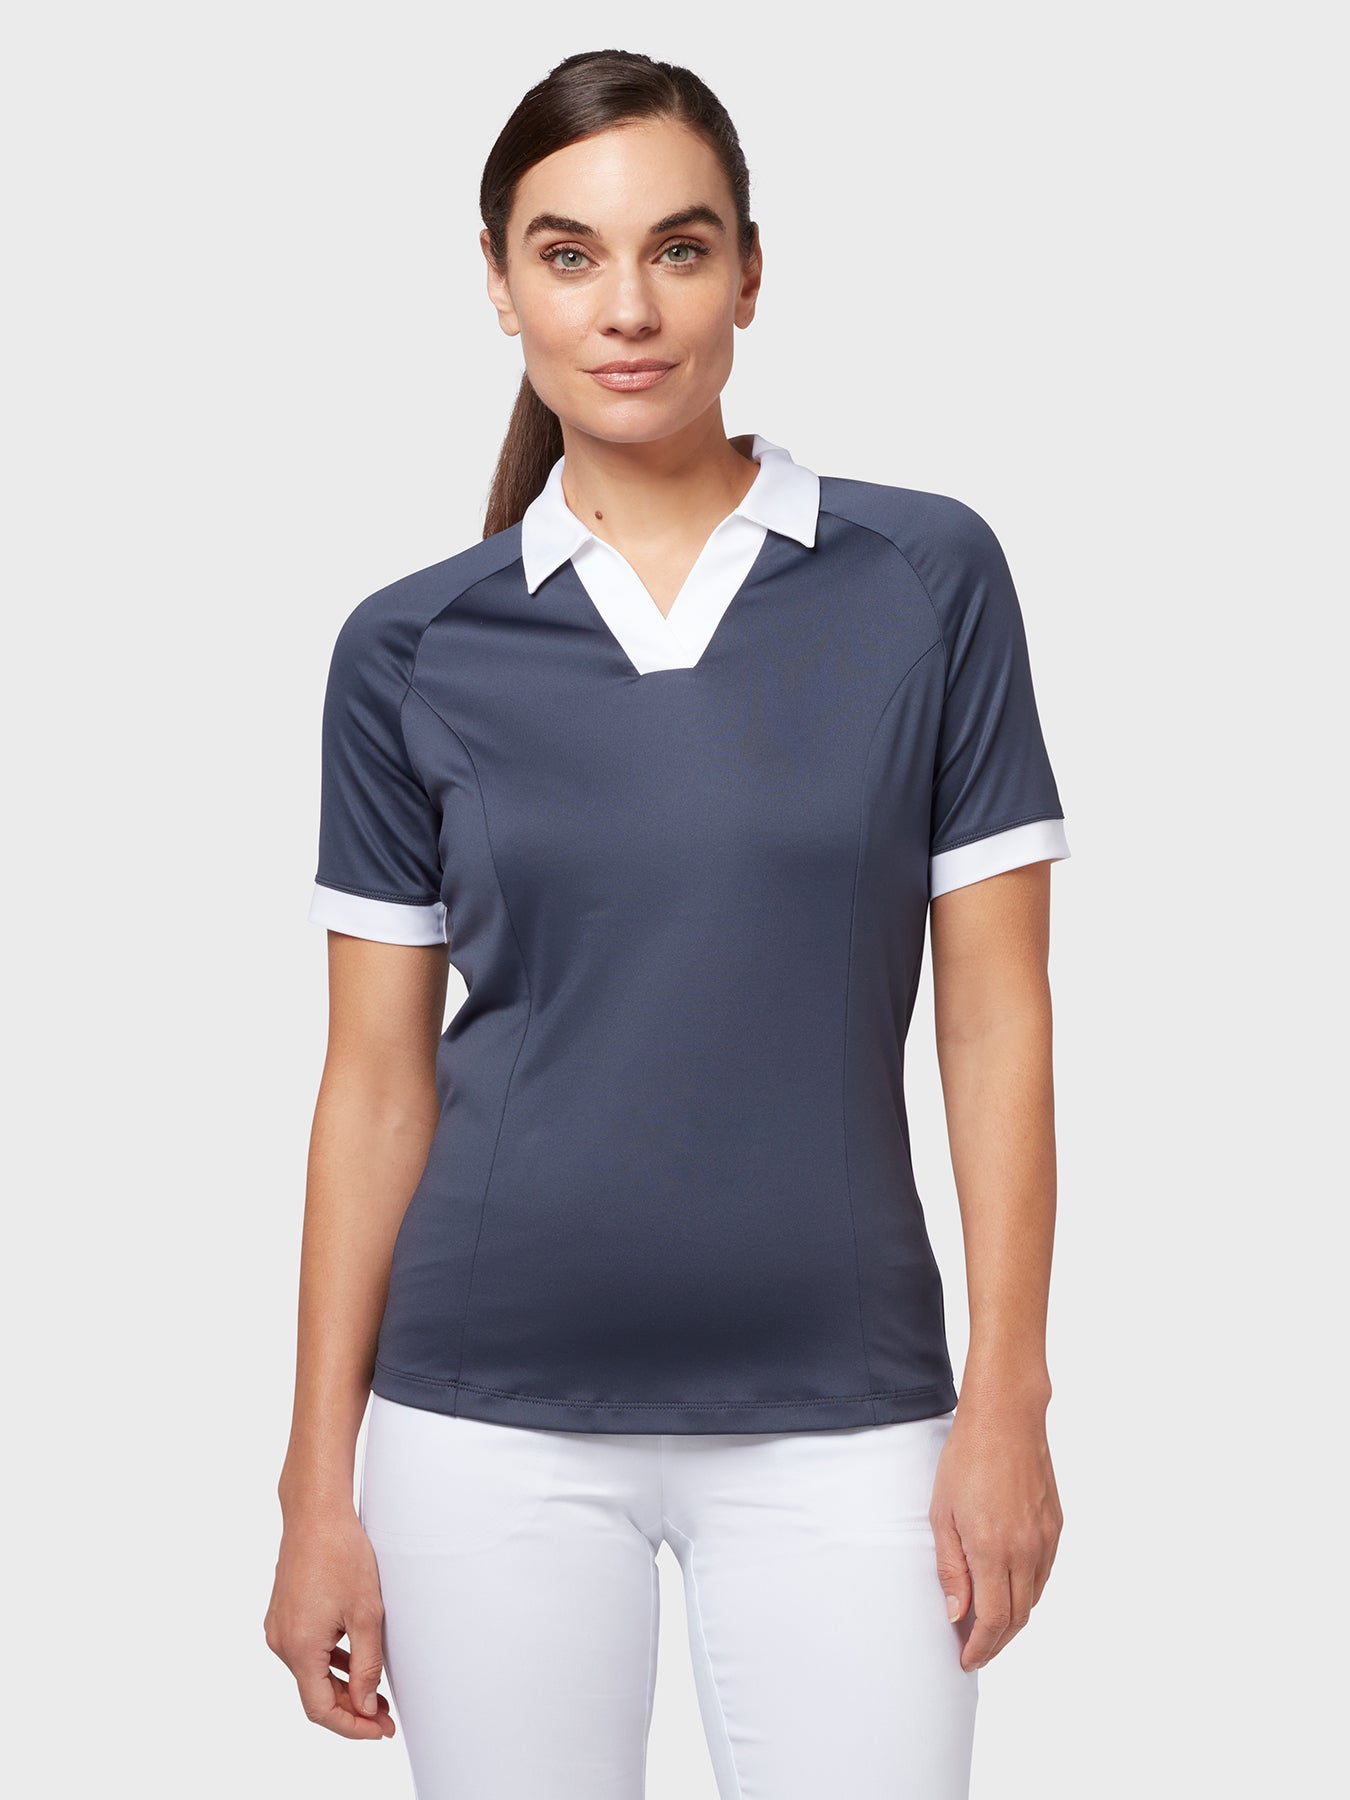 View VPlacket Colourblock Womens Polo In Odyssey Gray Odyssey Gray S information